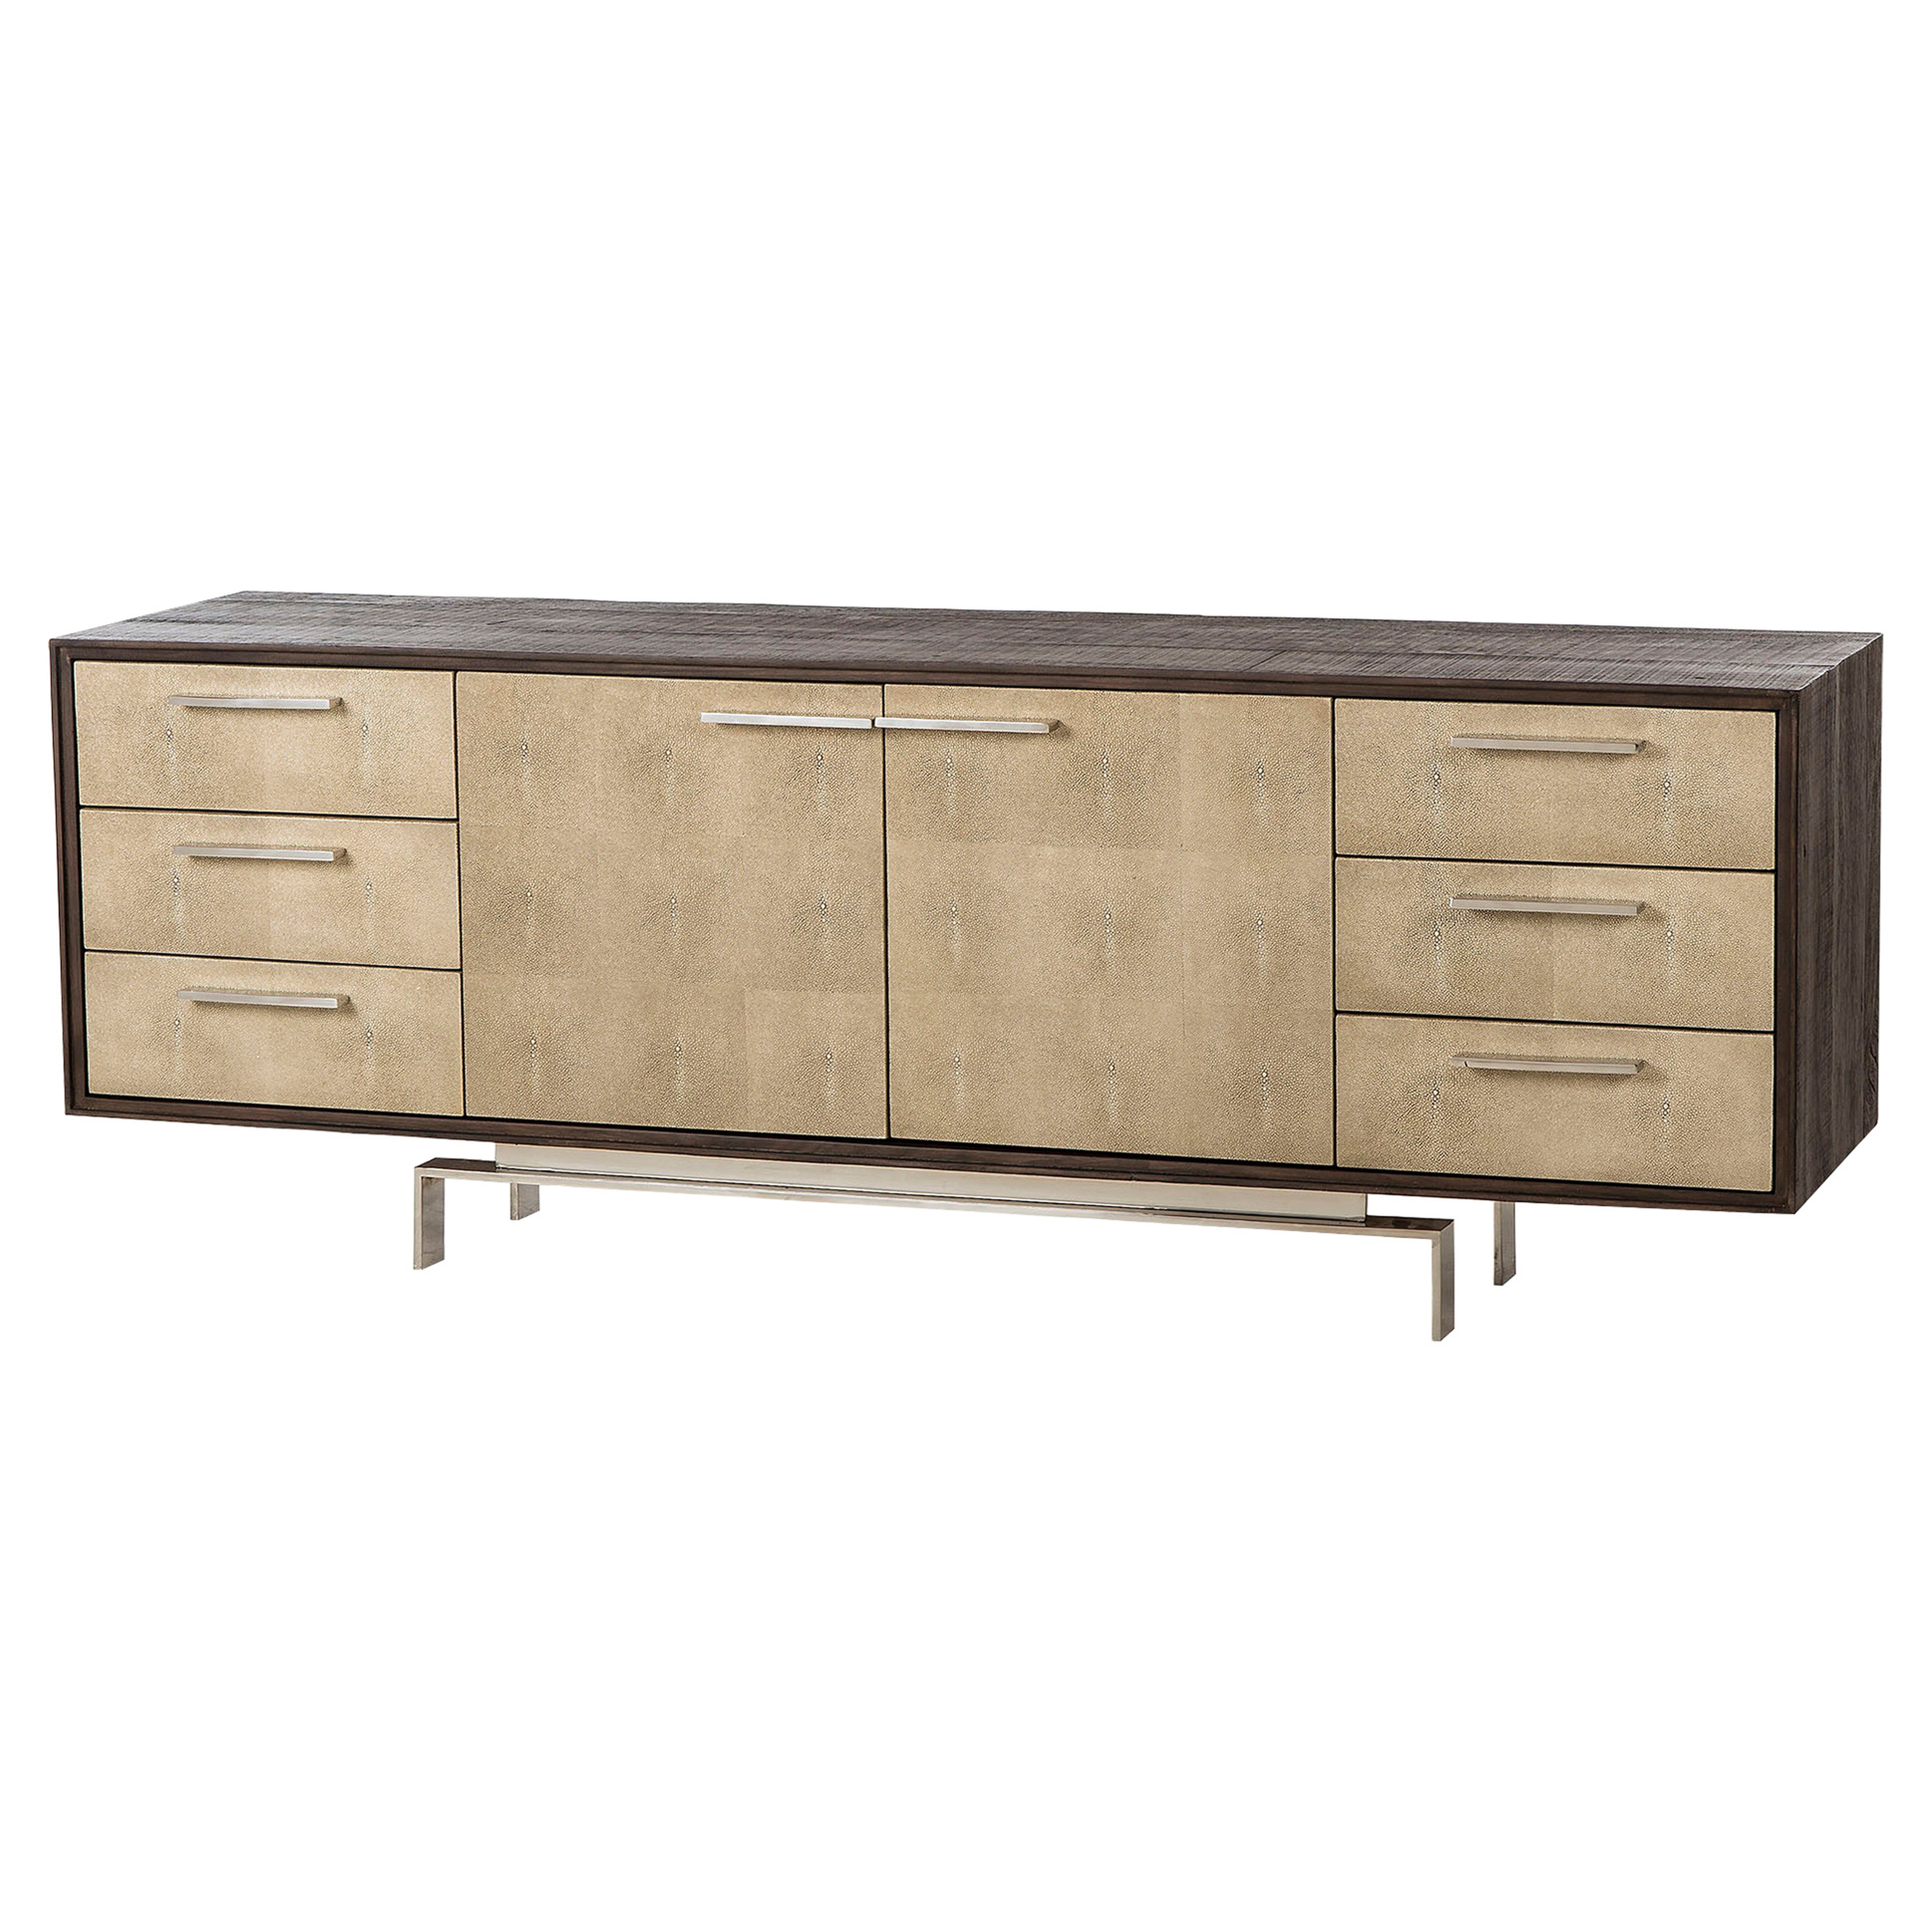 Resource Decor Mid Century Latham Stainless Steel Shagreen 6 Drawer Sideboard - Kathy Kuo Home